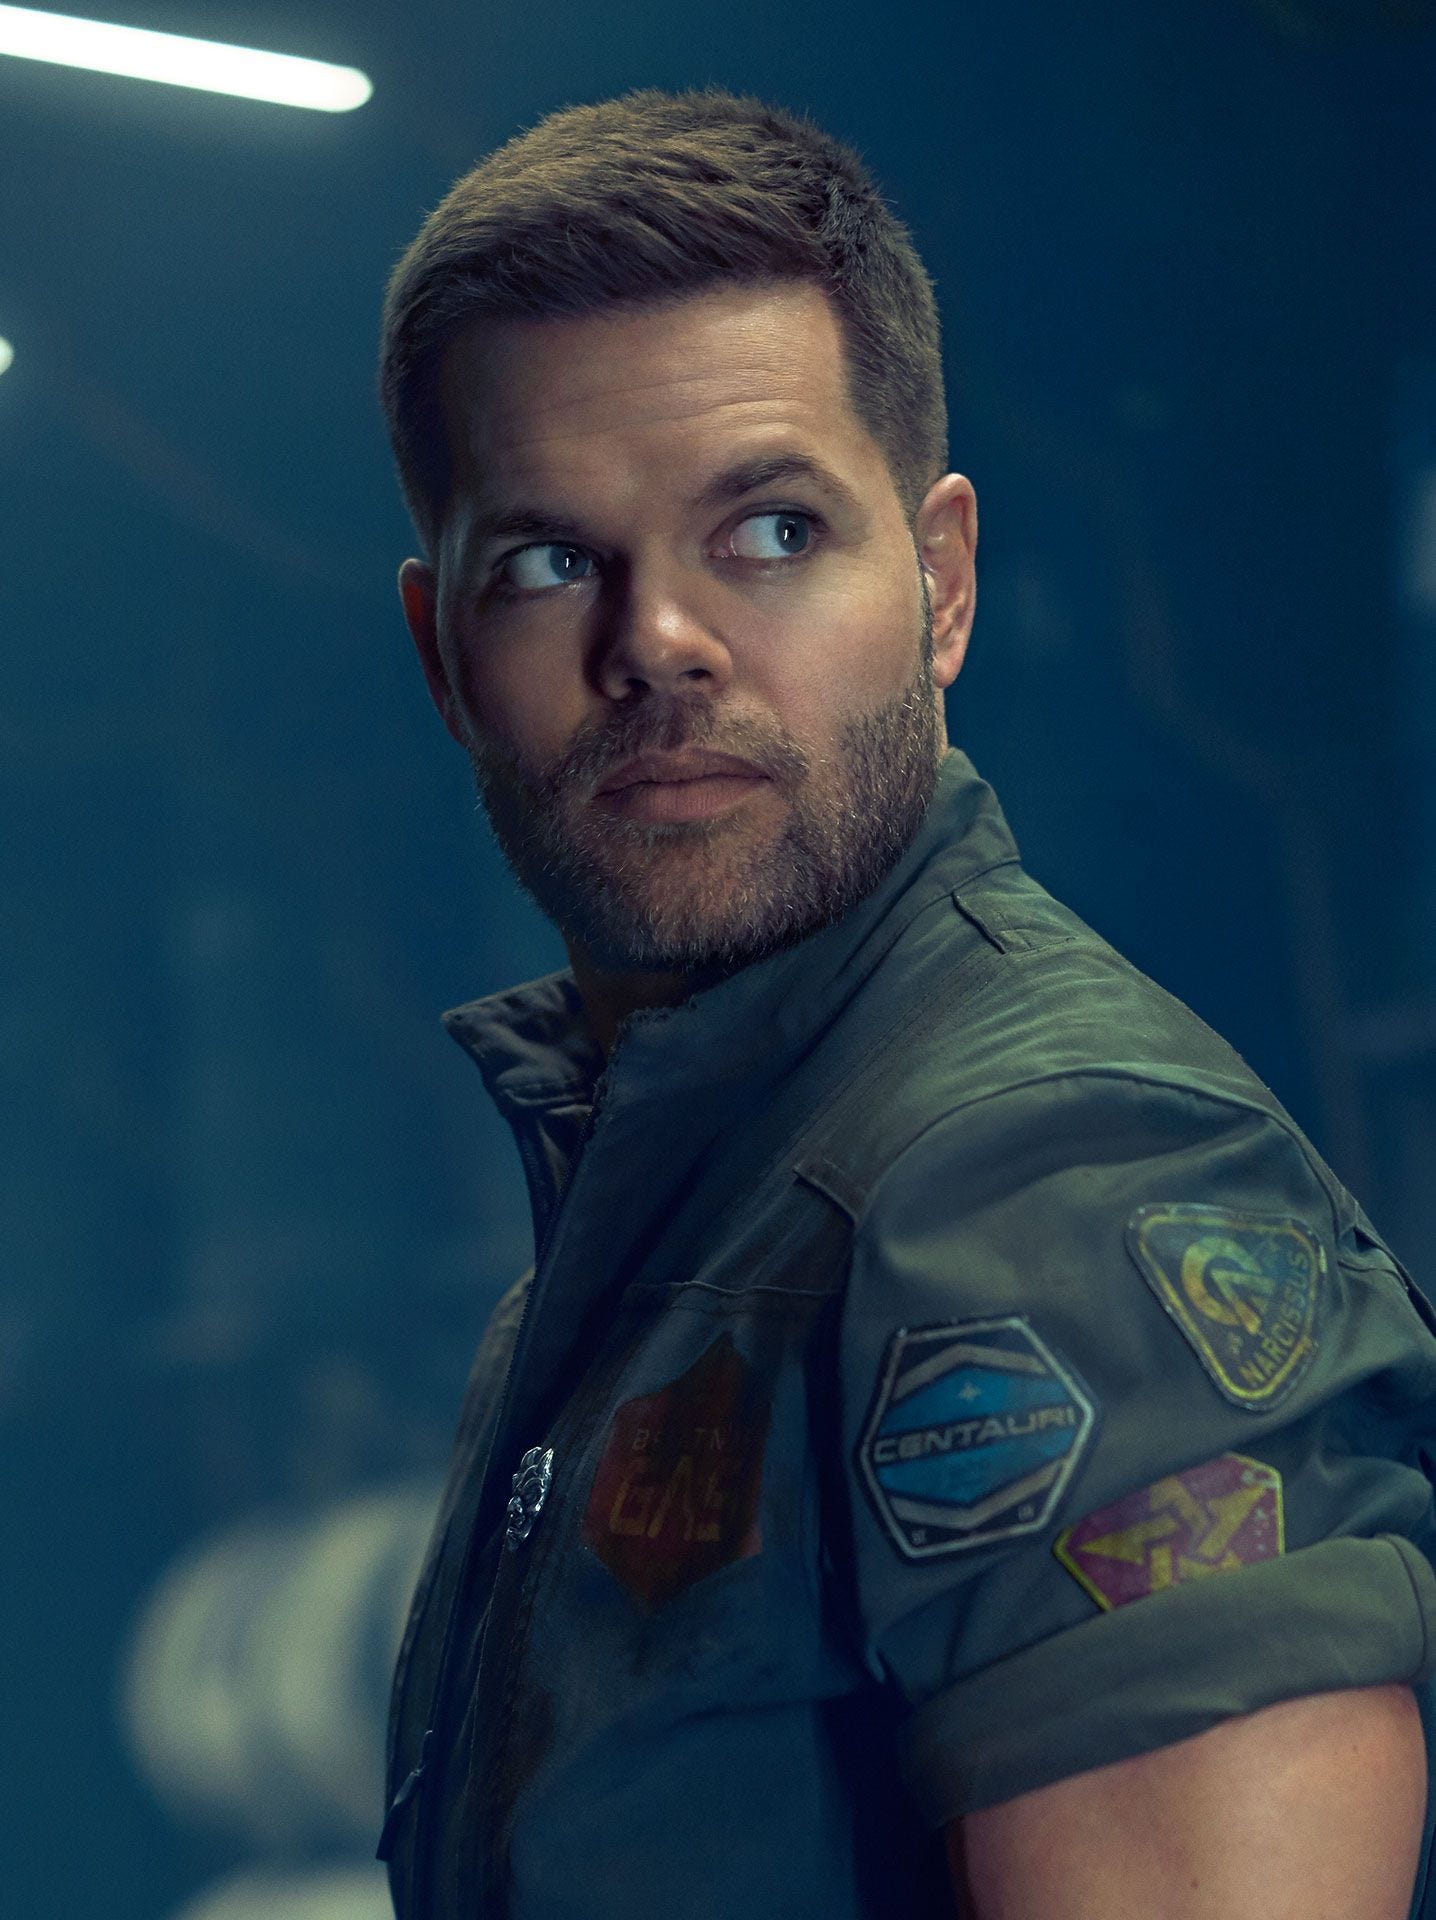 Still shot of Wes Chatham who plays Amos on The Expanse -- he's a white man with sandy brown hair, big eyes, stubble on his jaw, and a muscular form (sorry I don't know how else to phrase this). He's wearing one of the jumpsuits they always wear when they're crew on a ship.